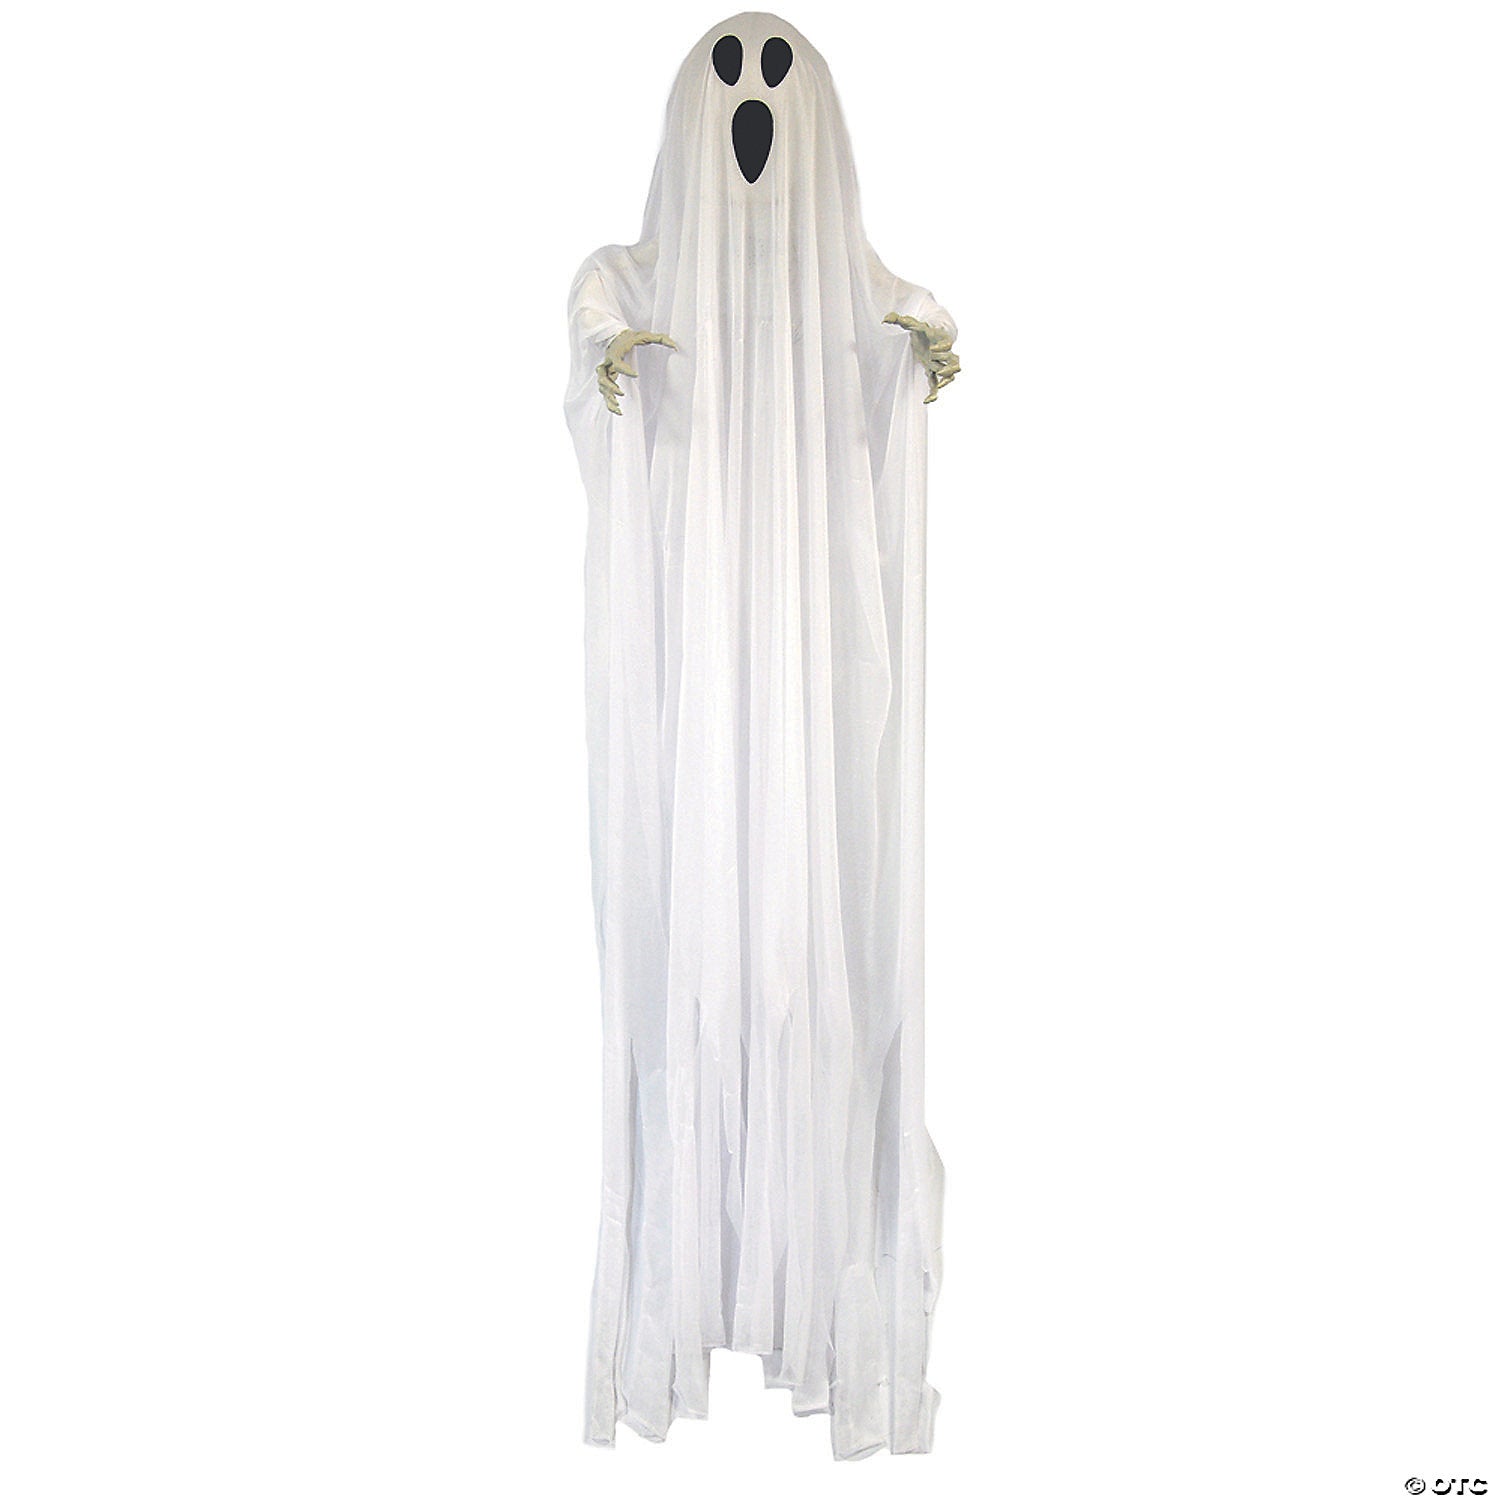 shaking-ghost-5ft-halloween-decoration